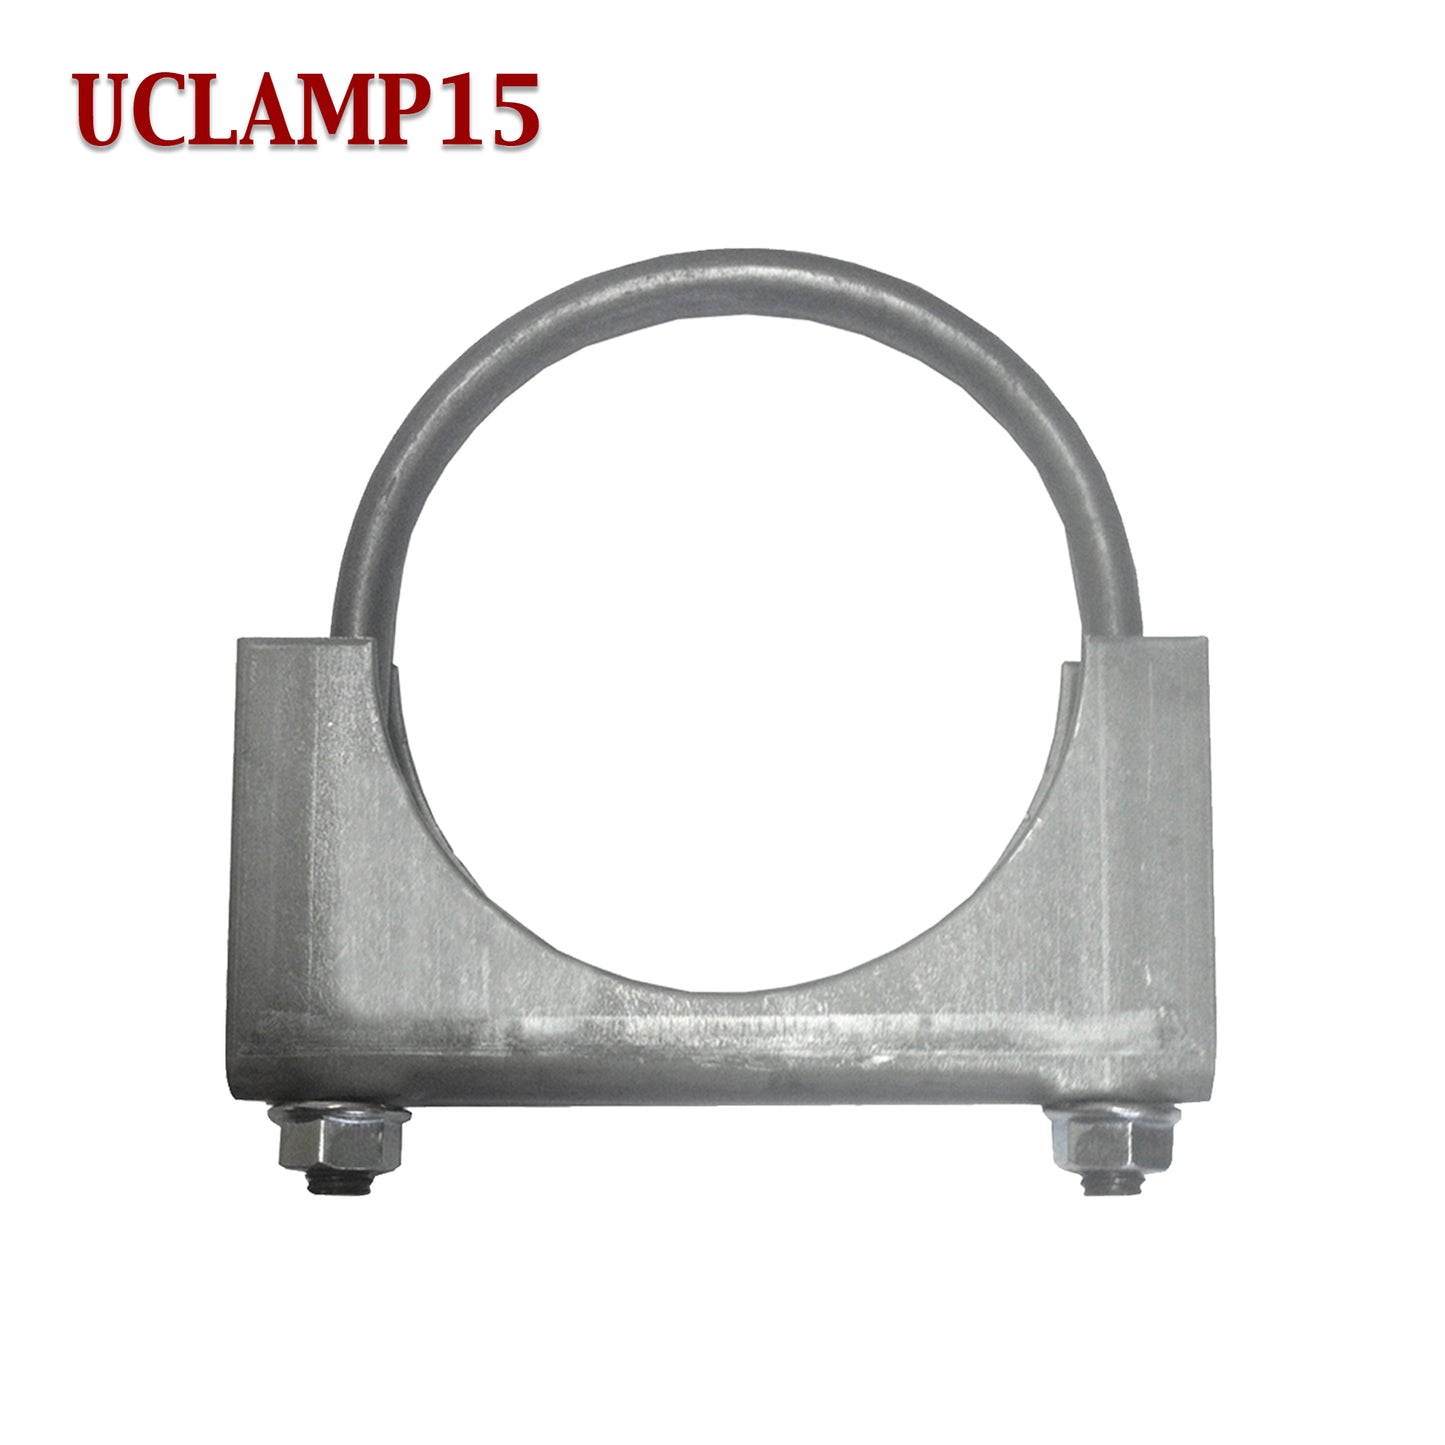 1 1/2" Exhaust Muffler Clamp U-Bolt Saddle Style For 1.5" Pipe